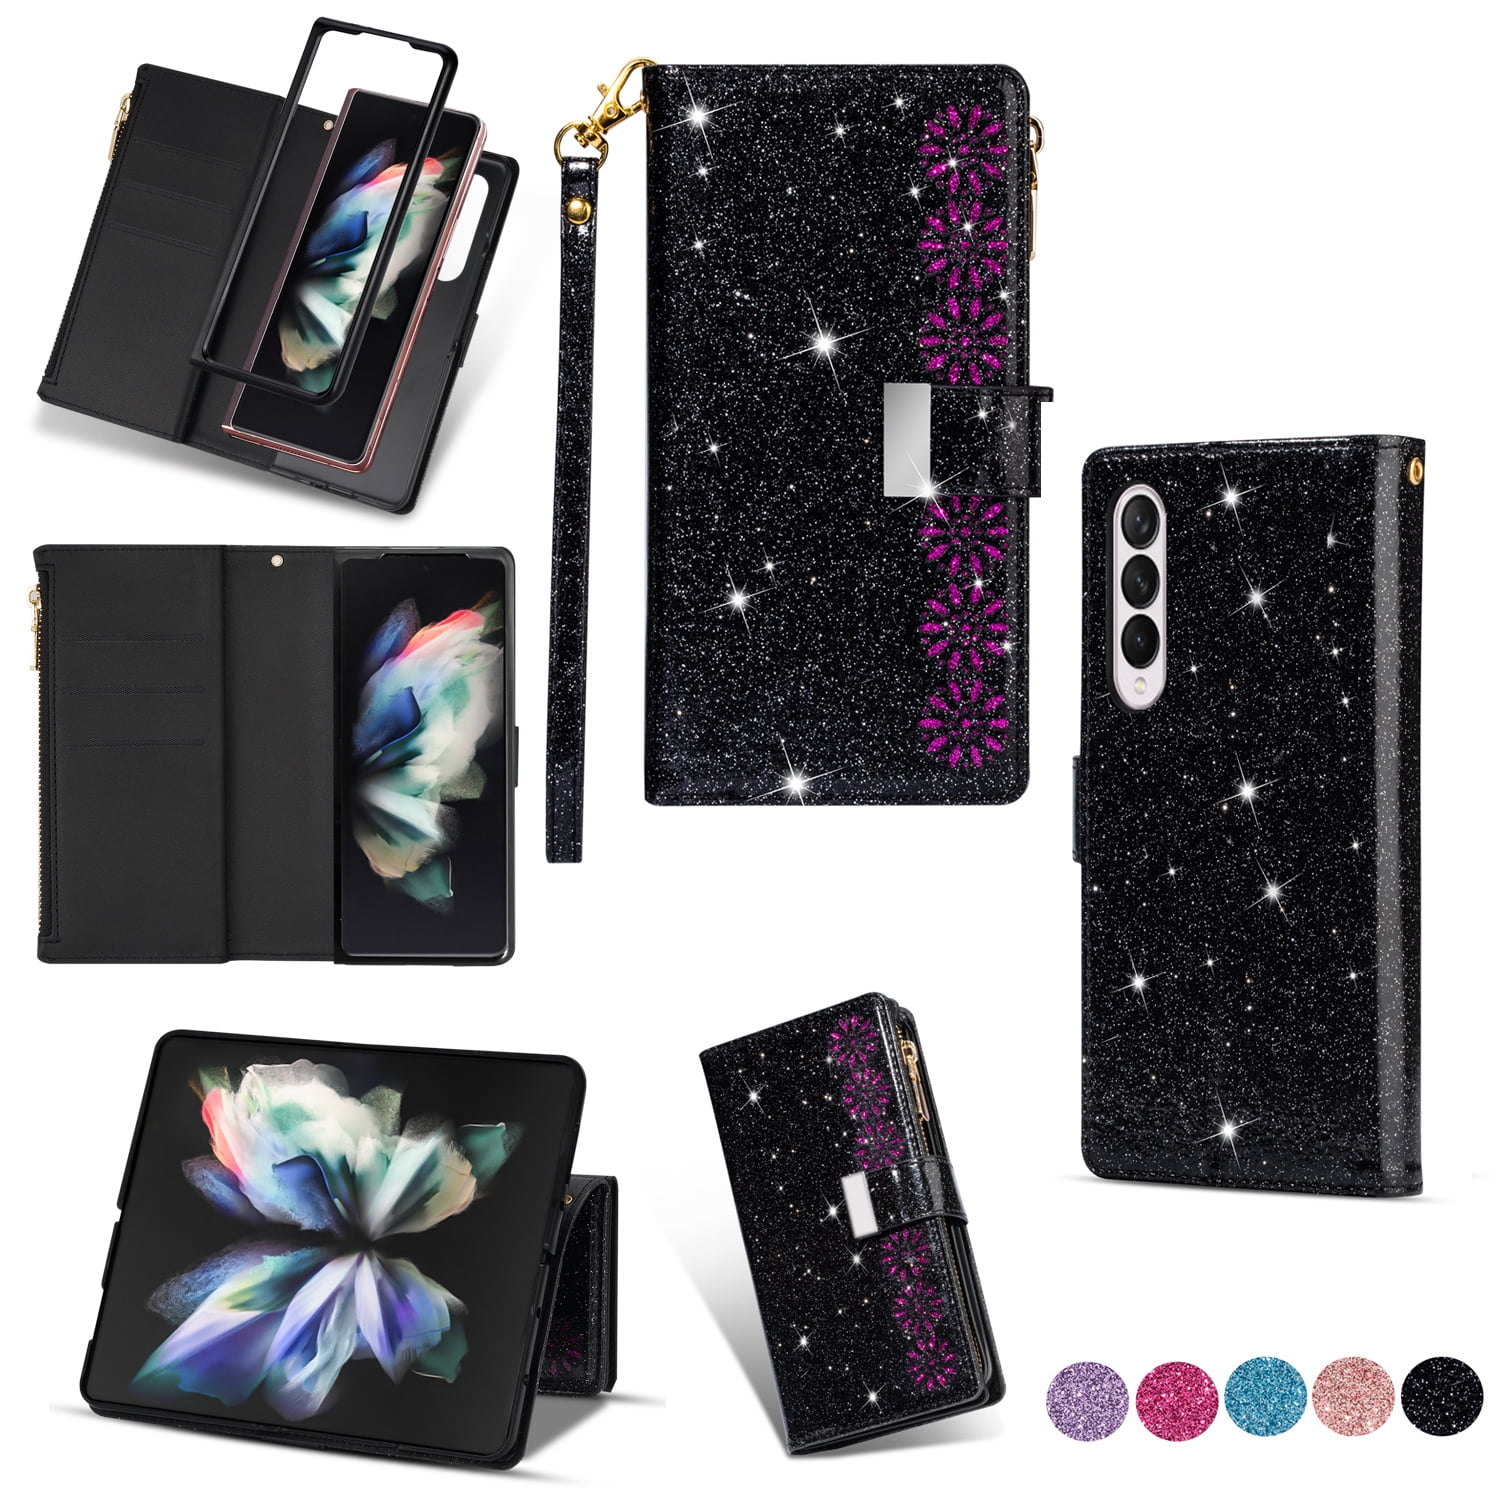 .com: Topone Bling Crystal Diamonds Pearls PU Leather Flip Slots  Stand Wallet Case Cover F4 #8 Diamonds butterflys For Meizu MX4 : Beauty &  Personal Care